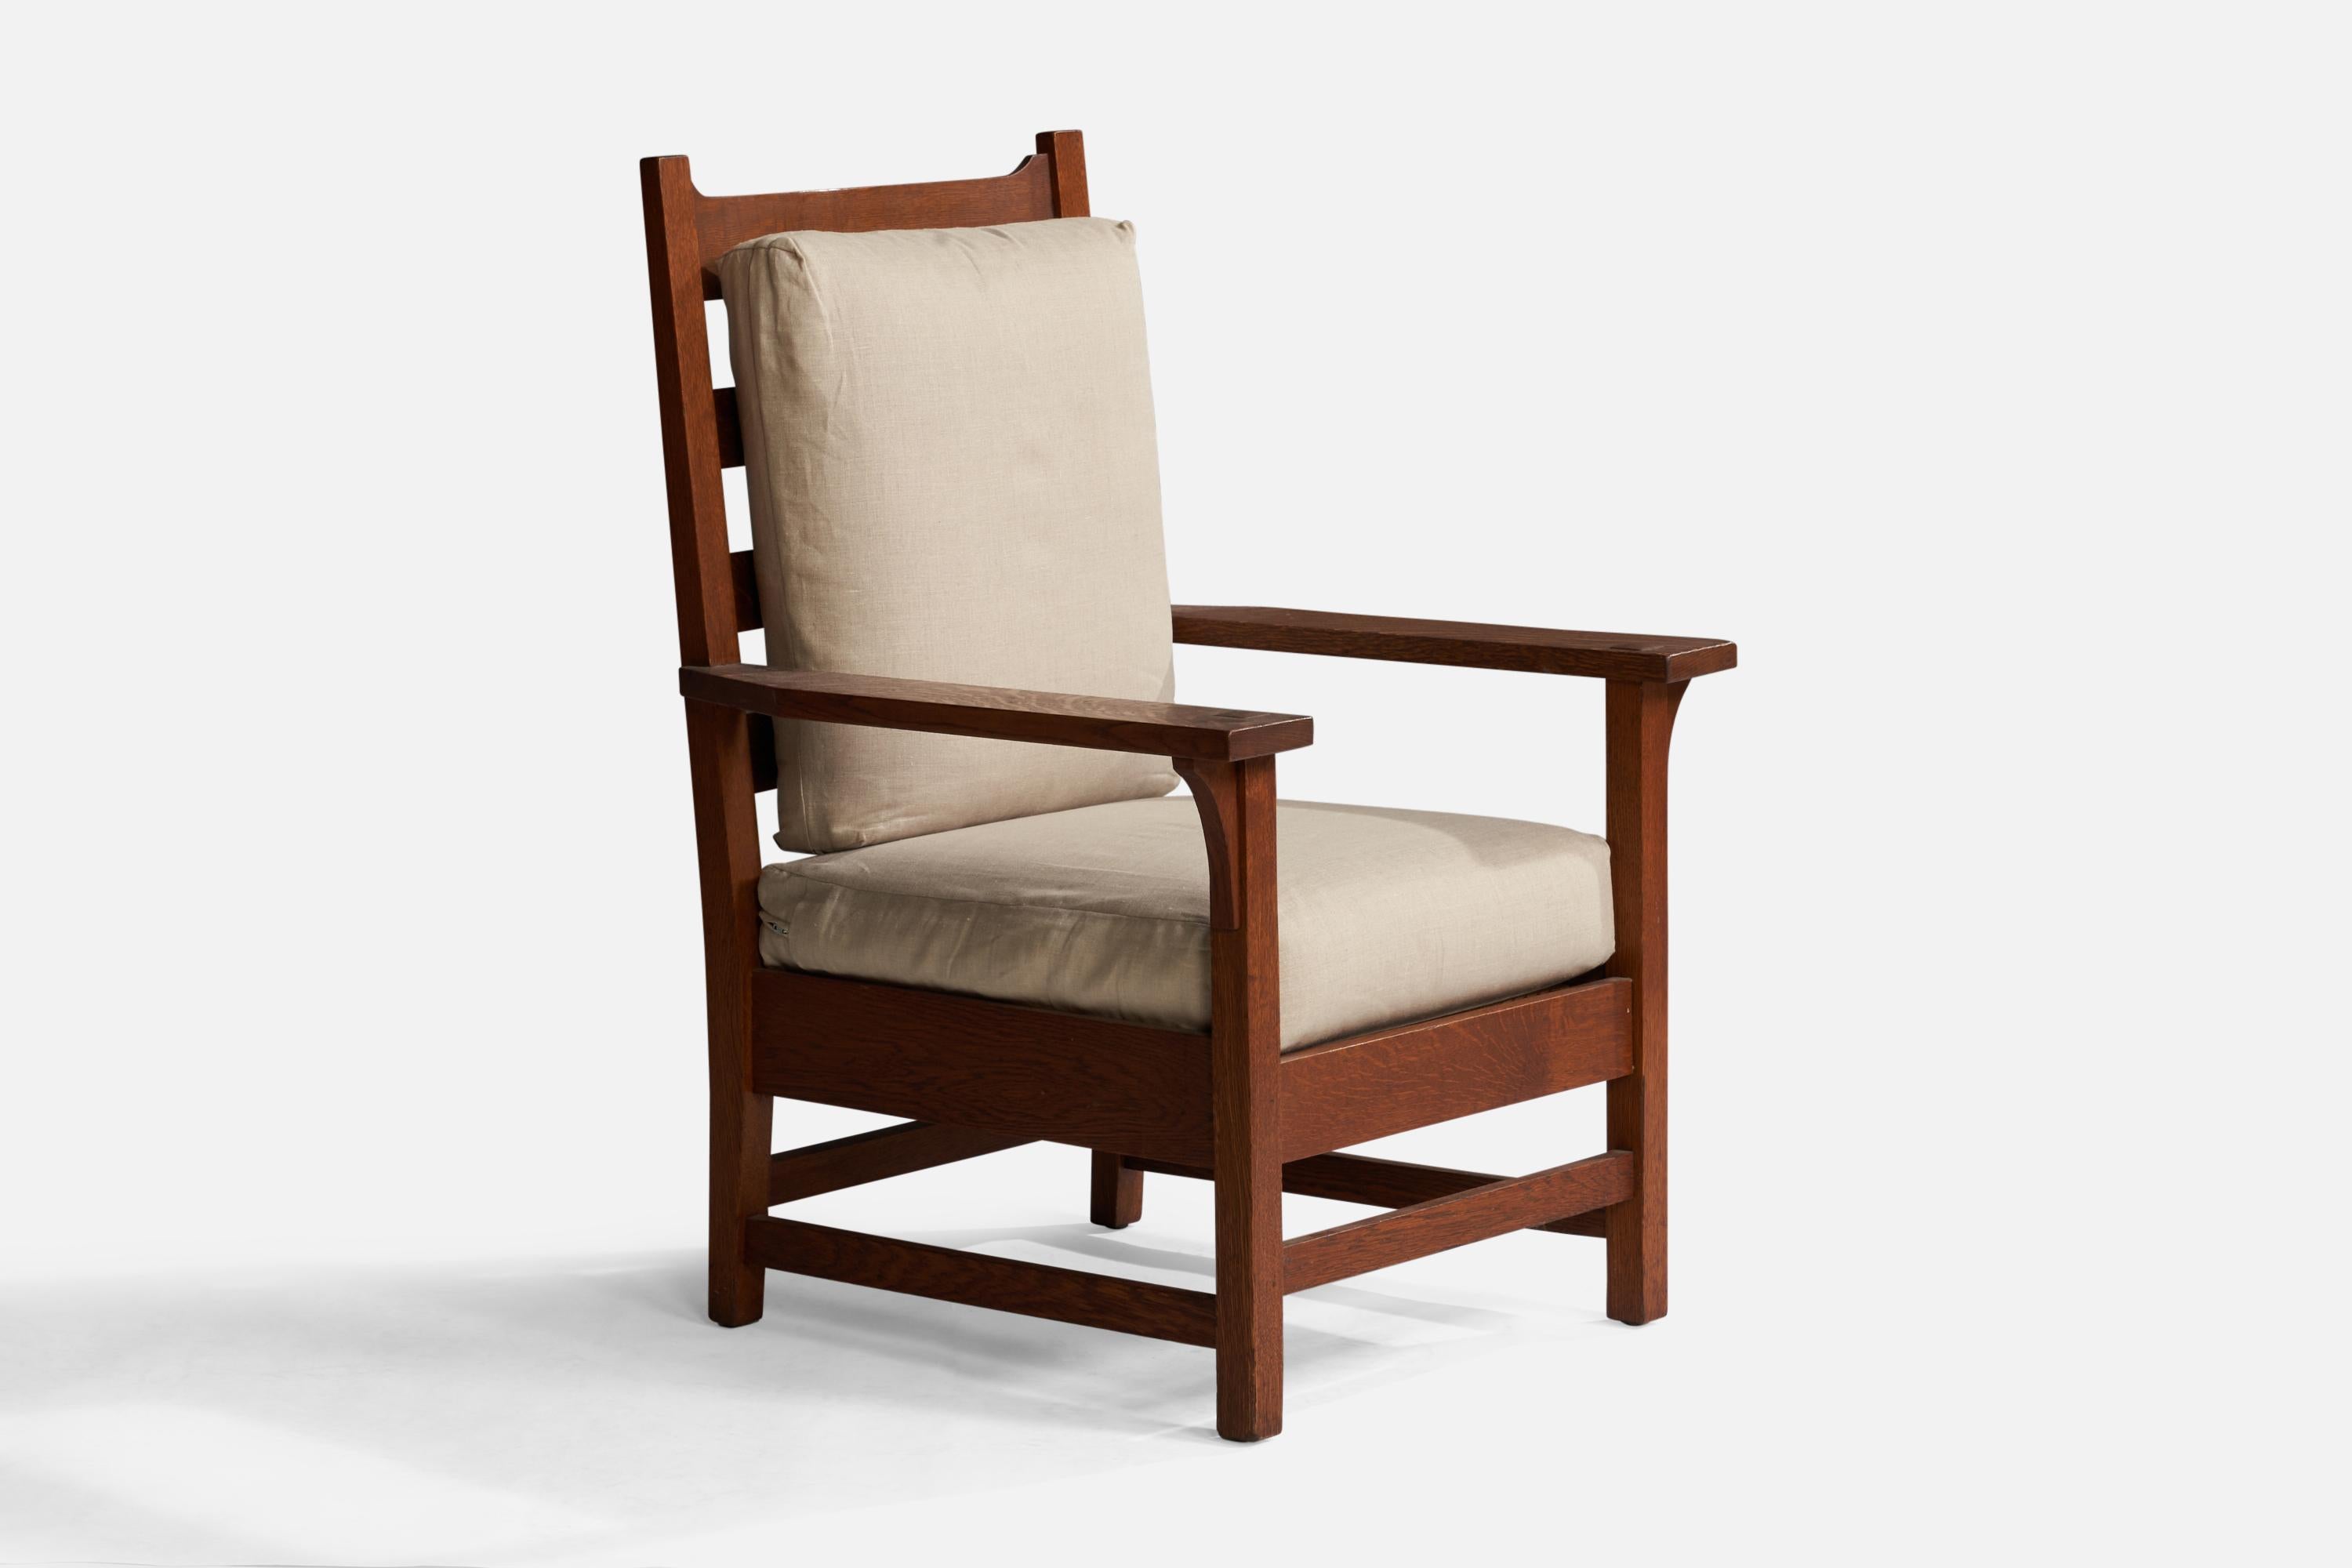 A stained oak and beige canvas armchair designed and produced by Gustav Stickley, USA, c. 1907

Seat height: 19.25